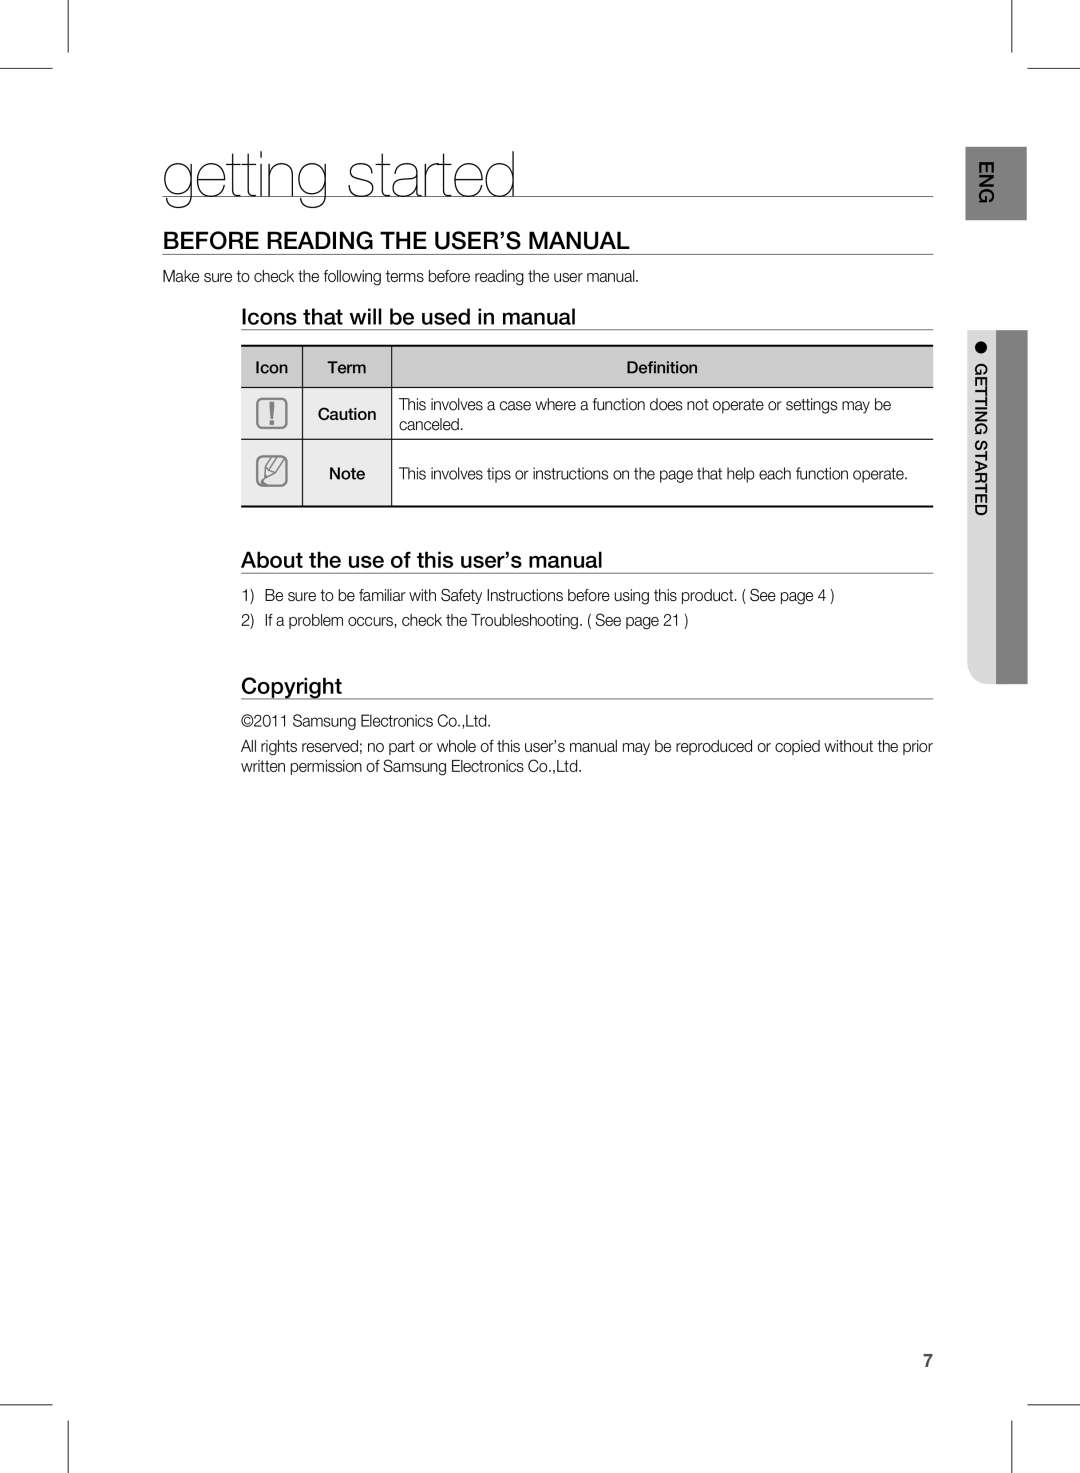 Samsung HW-D550, HW-D551 user manual getting started, Icons that will be used in manual, Copyright 